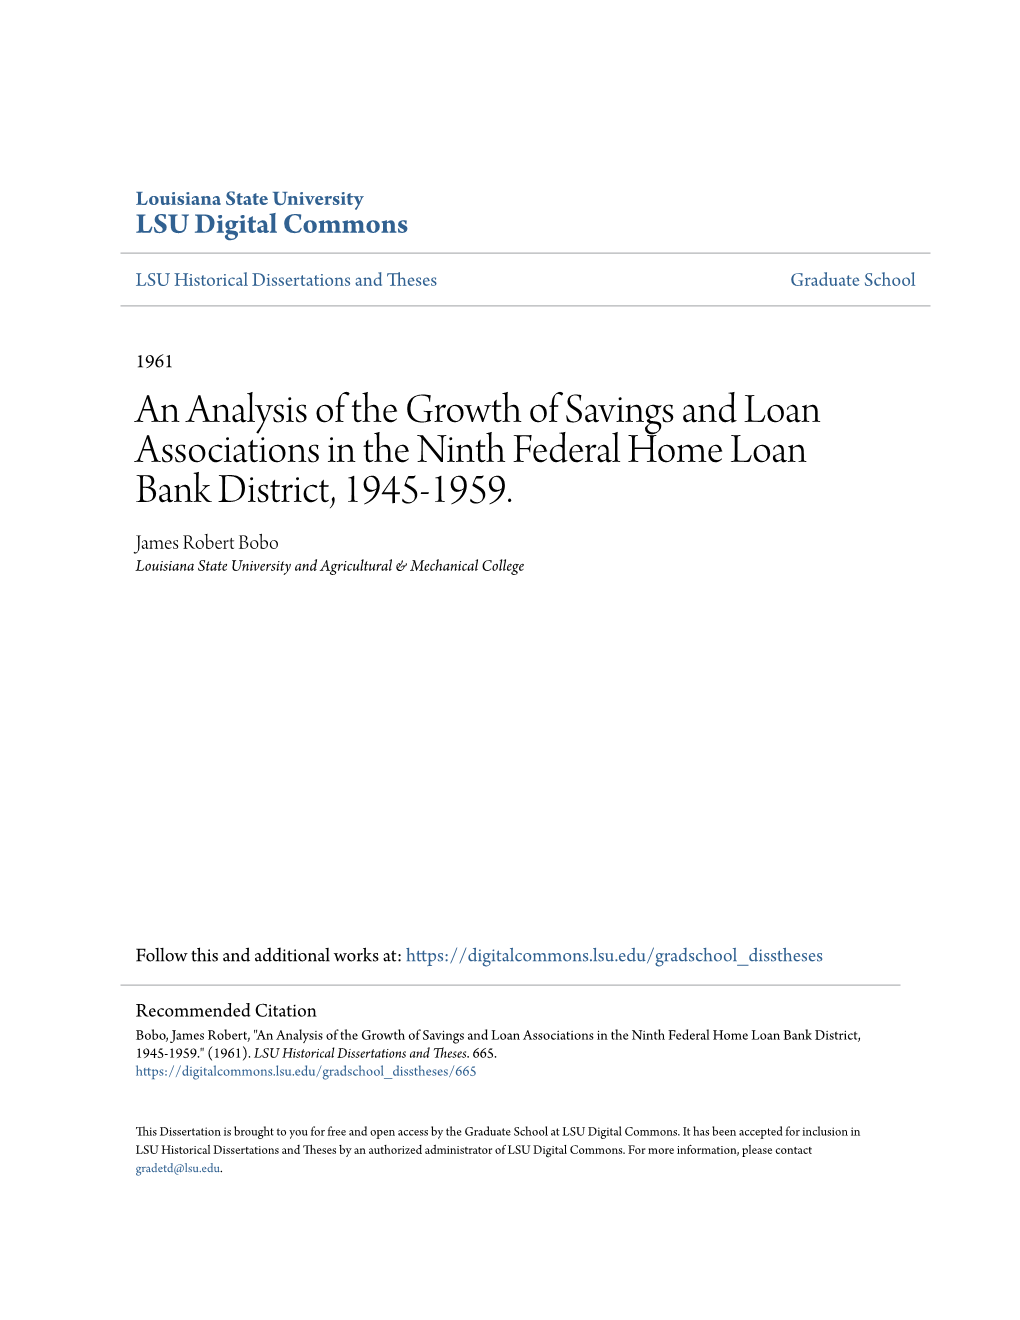 An Analysis of the Growth of Savings and Loan Associations in the Ninth Federal Home Loan Bank District, 1945-1959